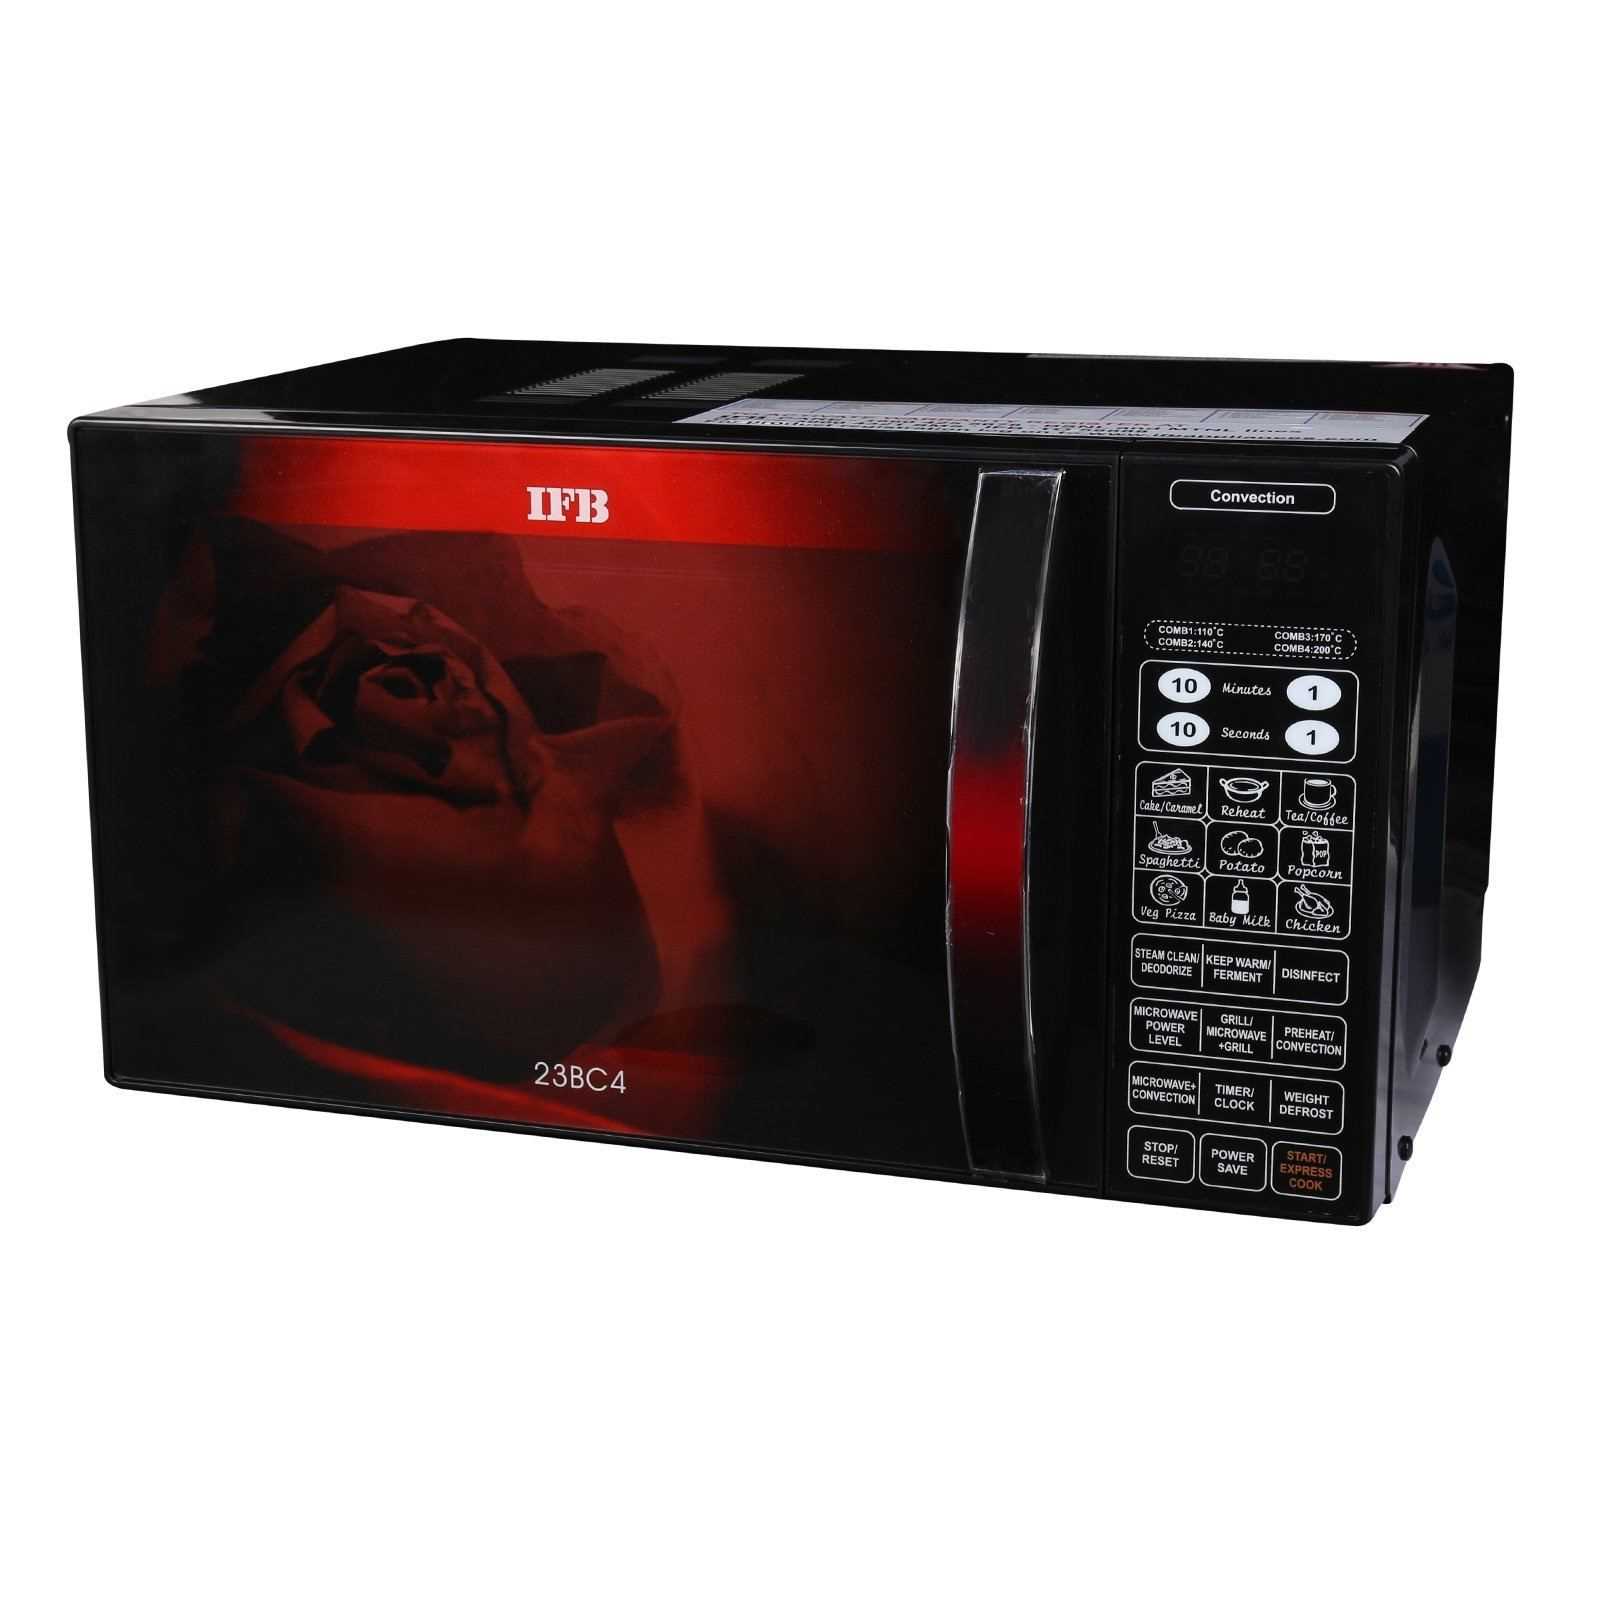 Best Microwave Ovens in India | Which Microwave Oven is Best?